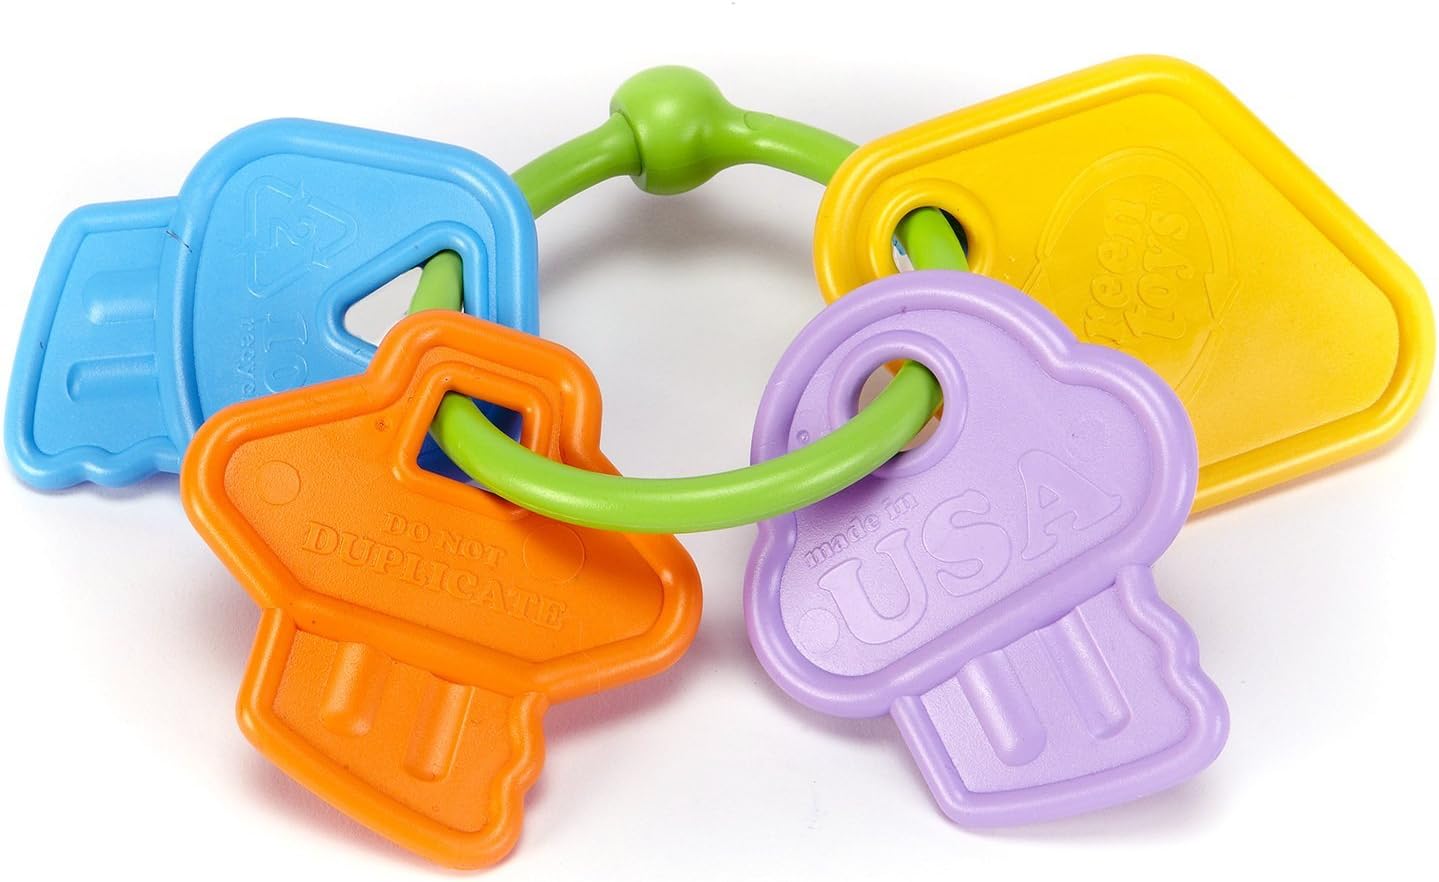 Green Toys First Keys, Teether